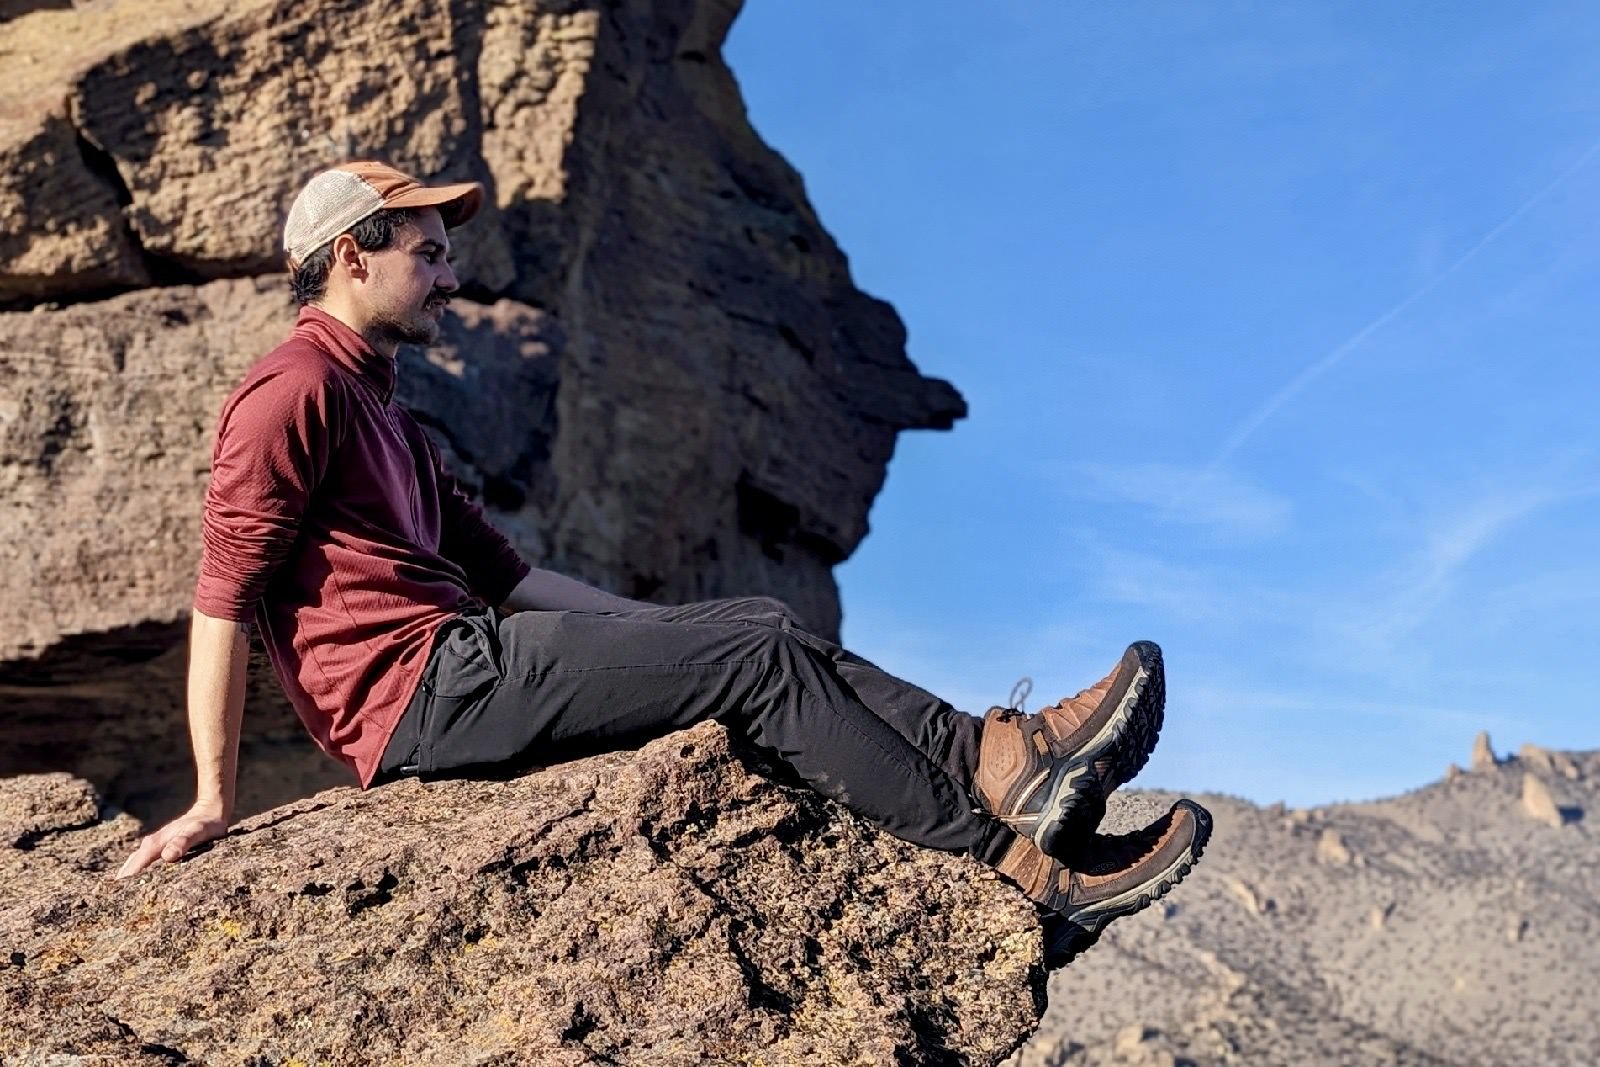 A hiker sitting on a ledge looking out over a mountain view with hiking boots on